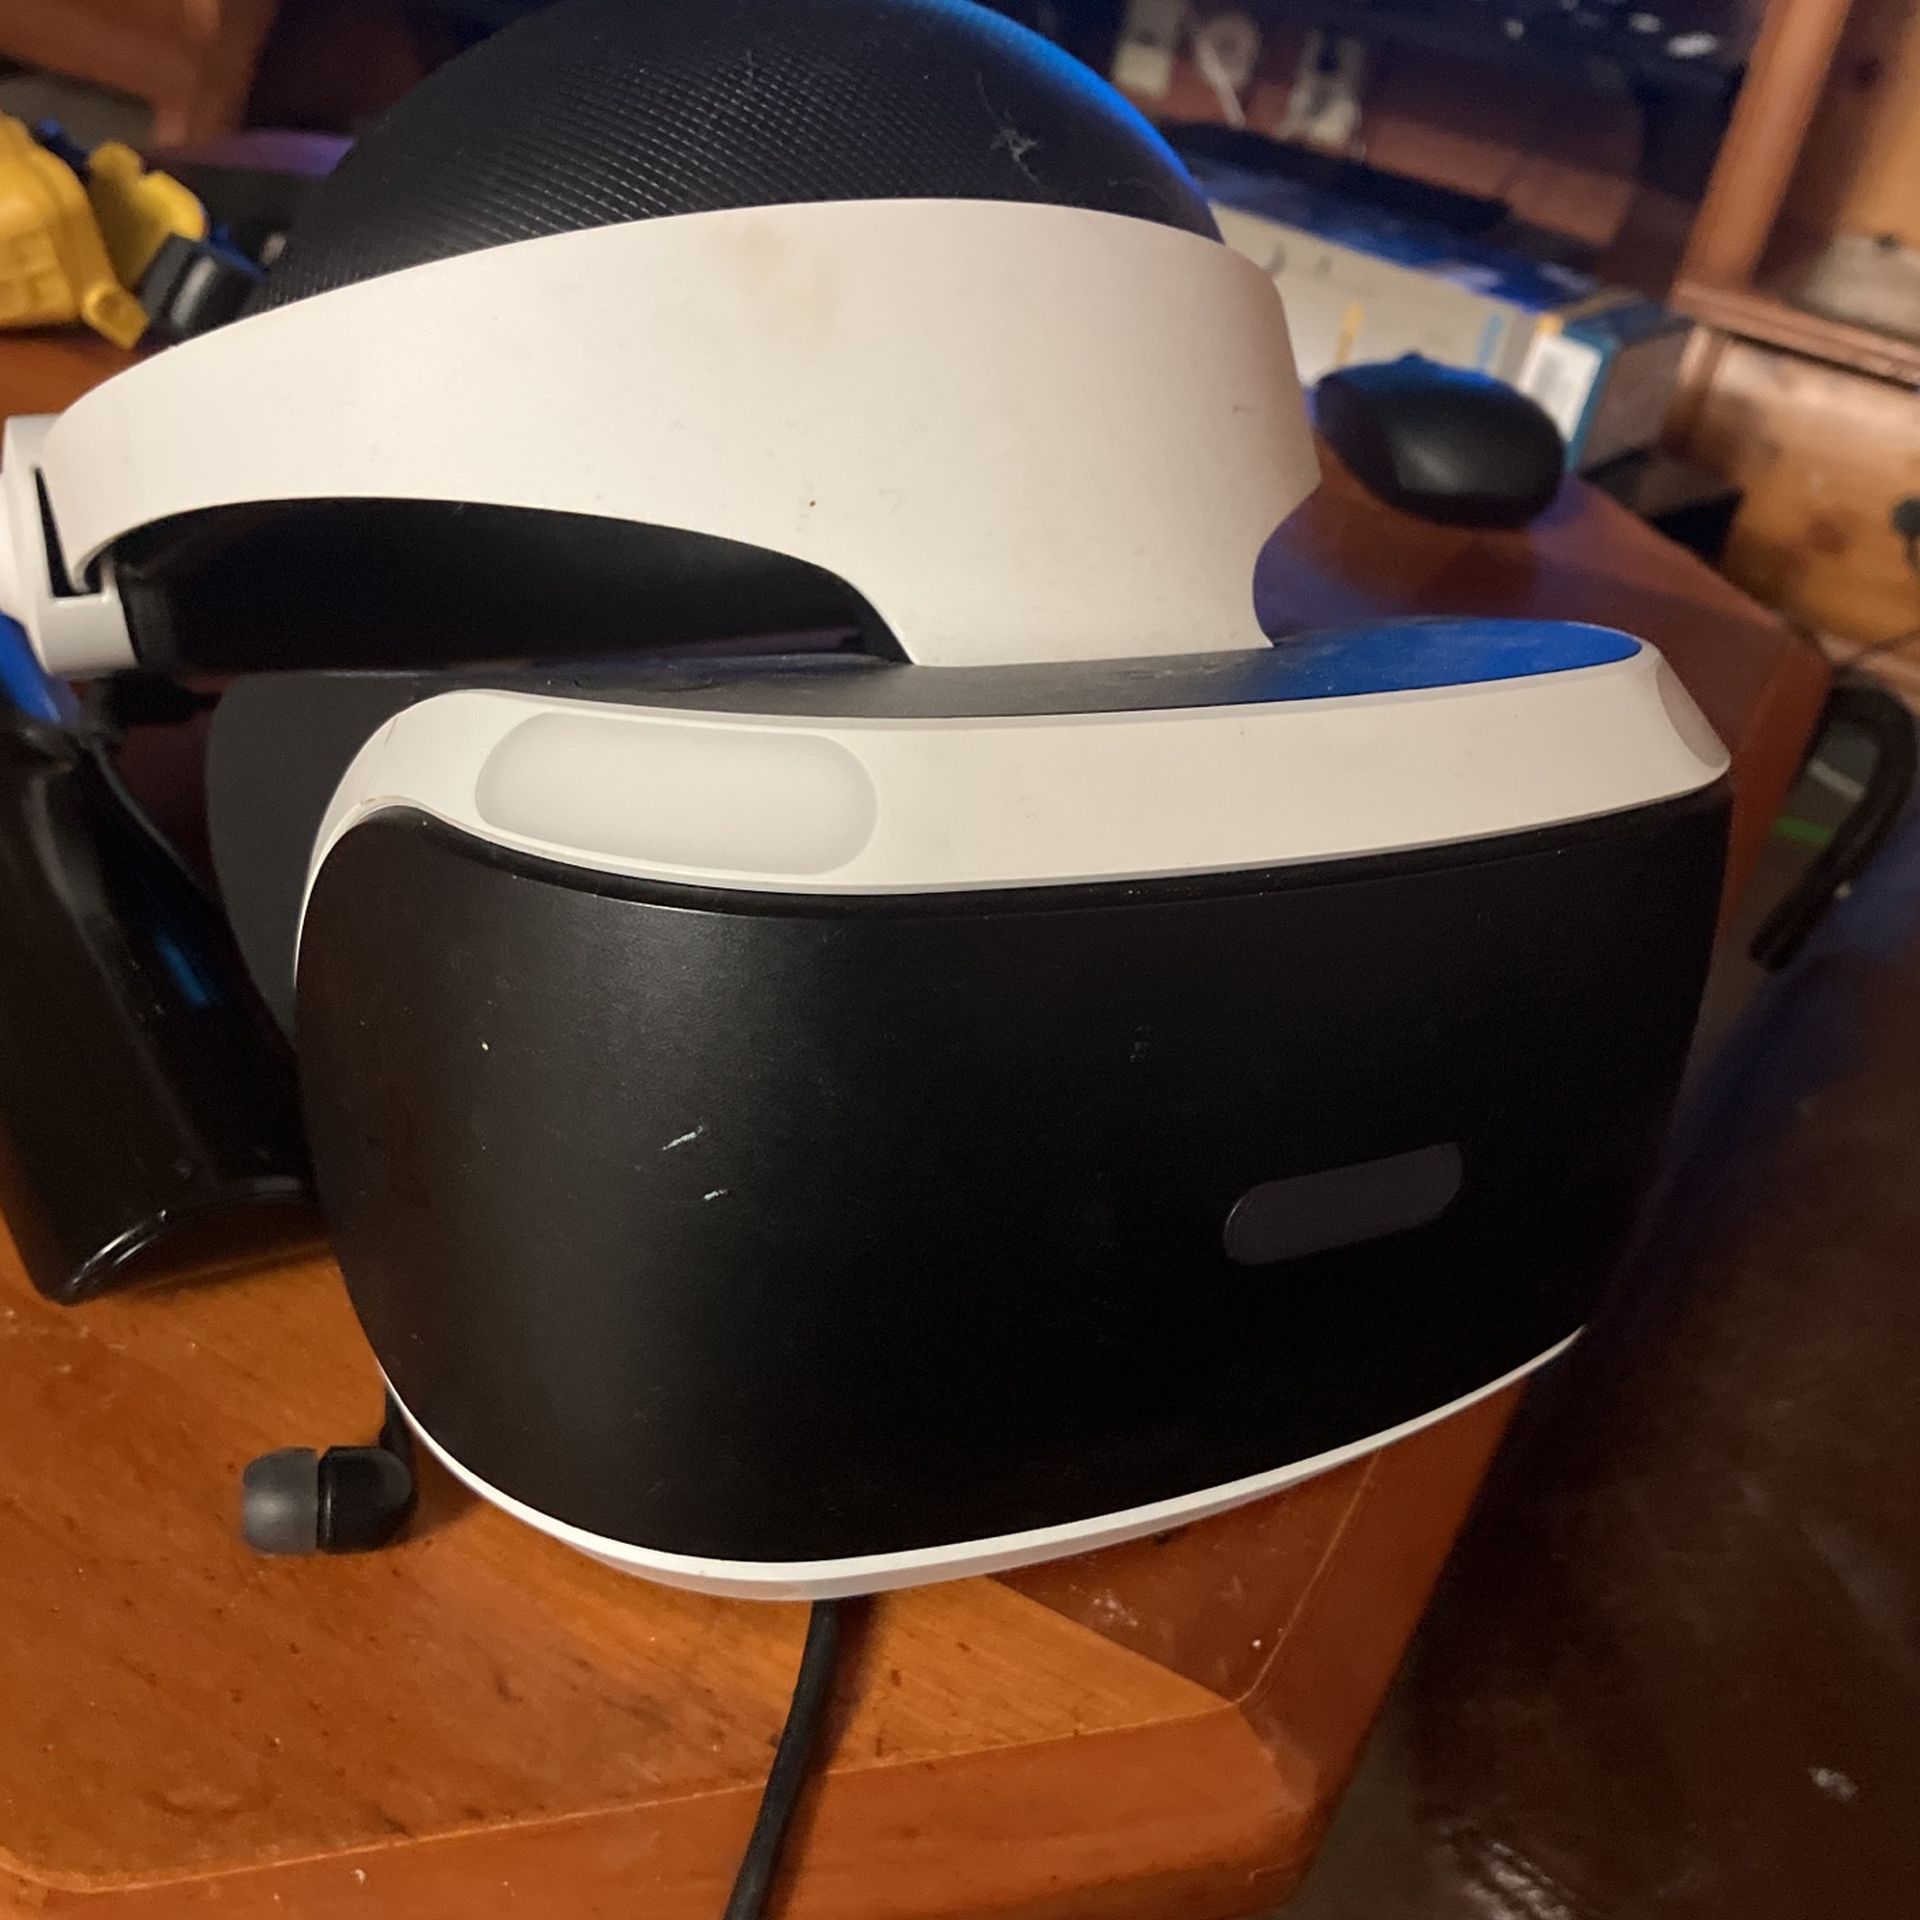 PSVR Looking To Trade For A Xbox 360 Or RGH 